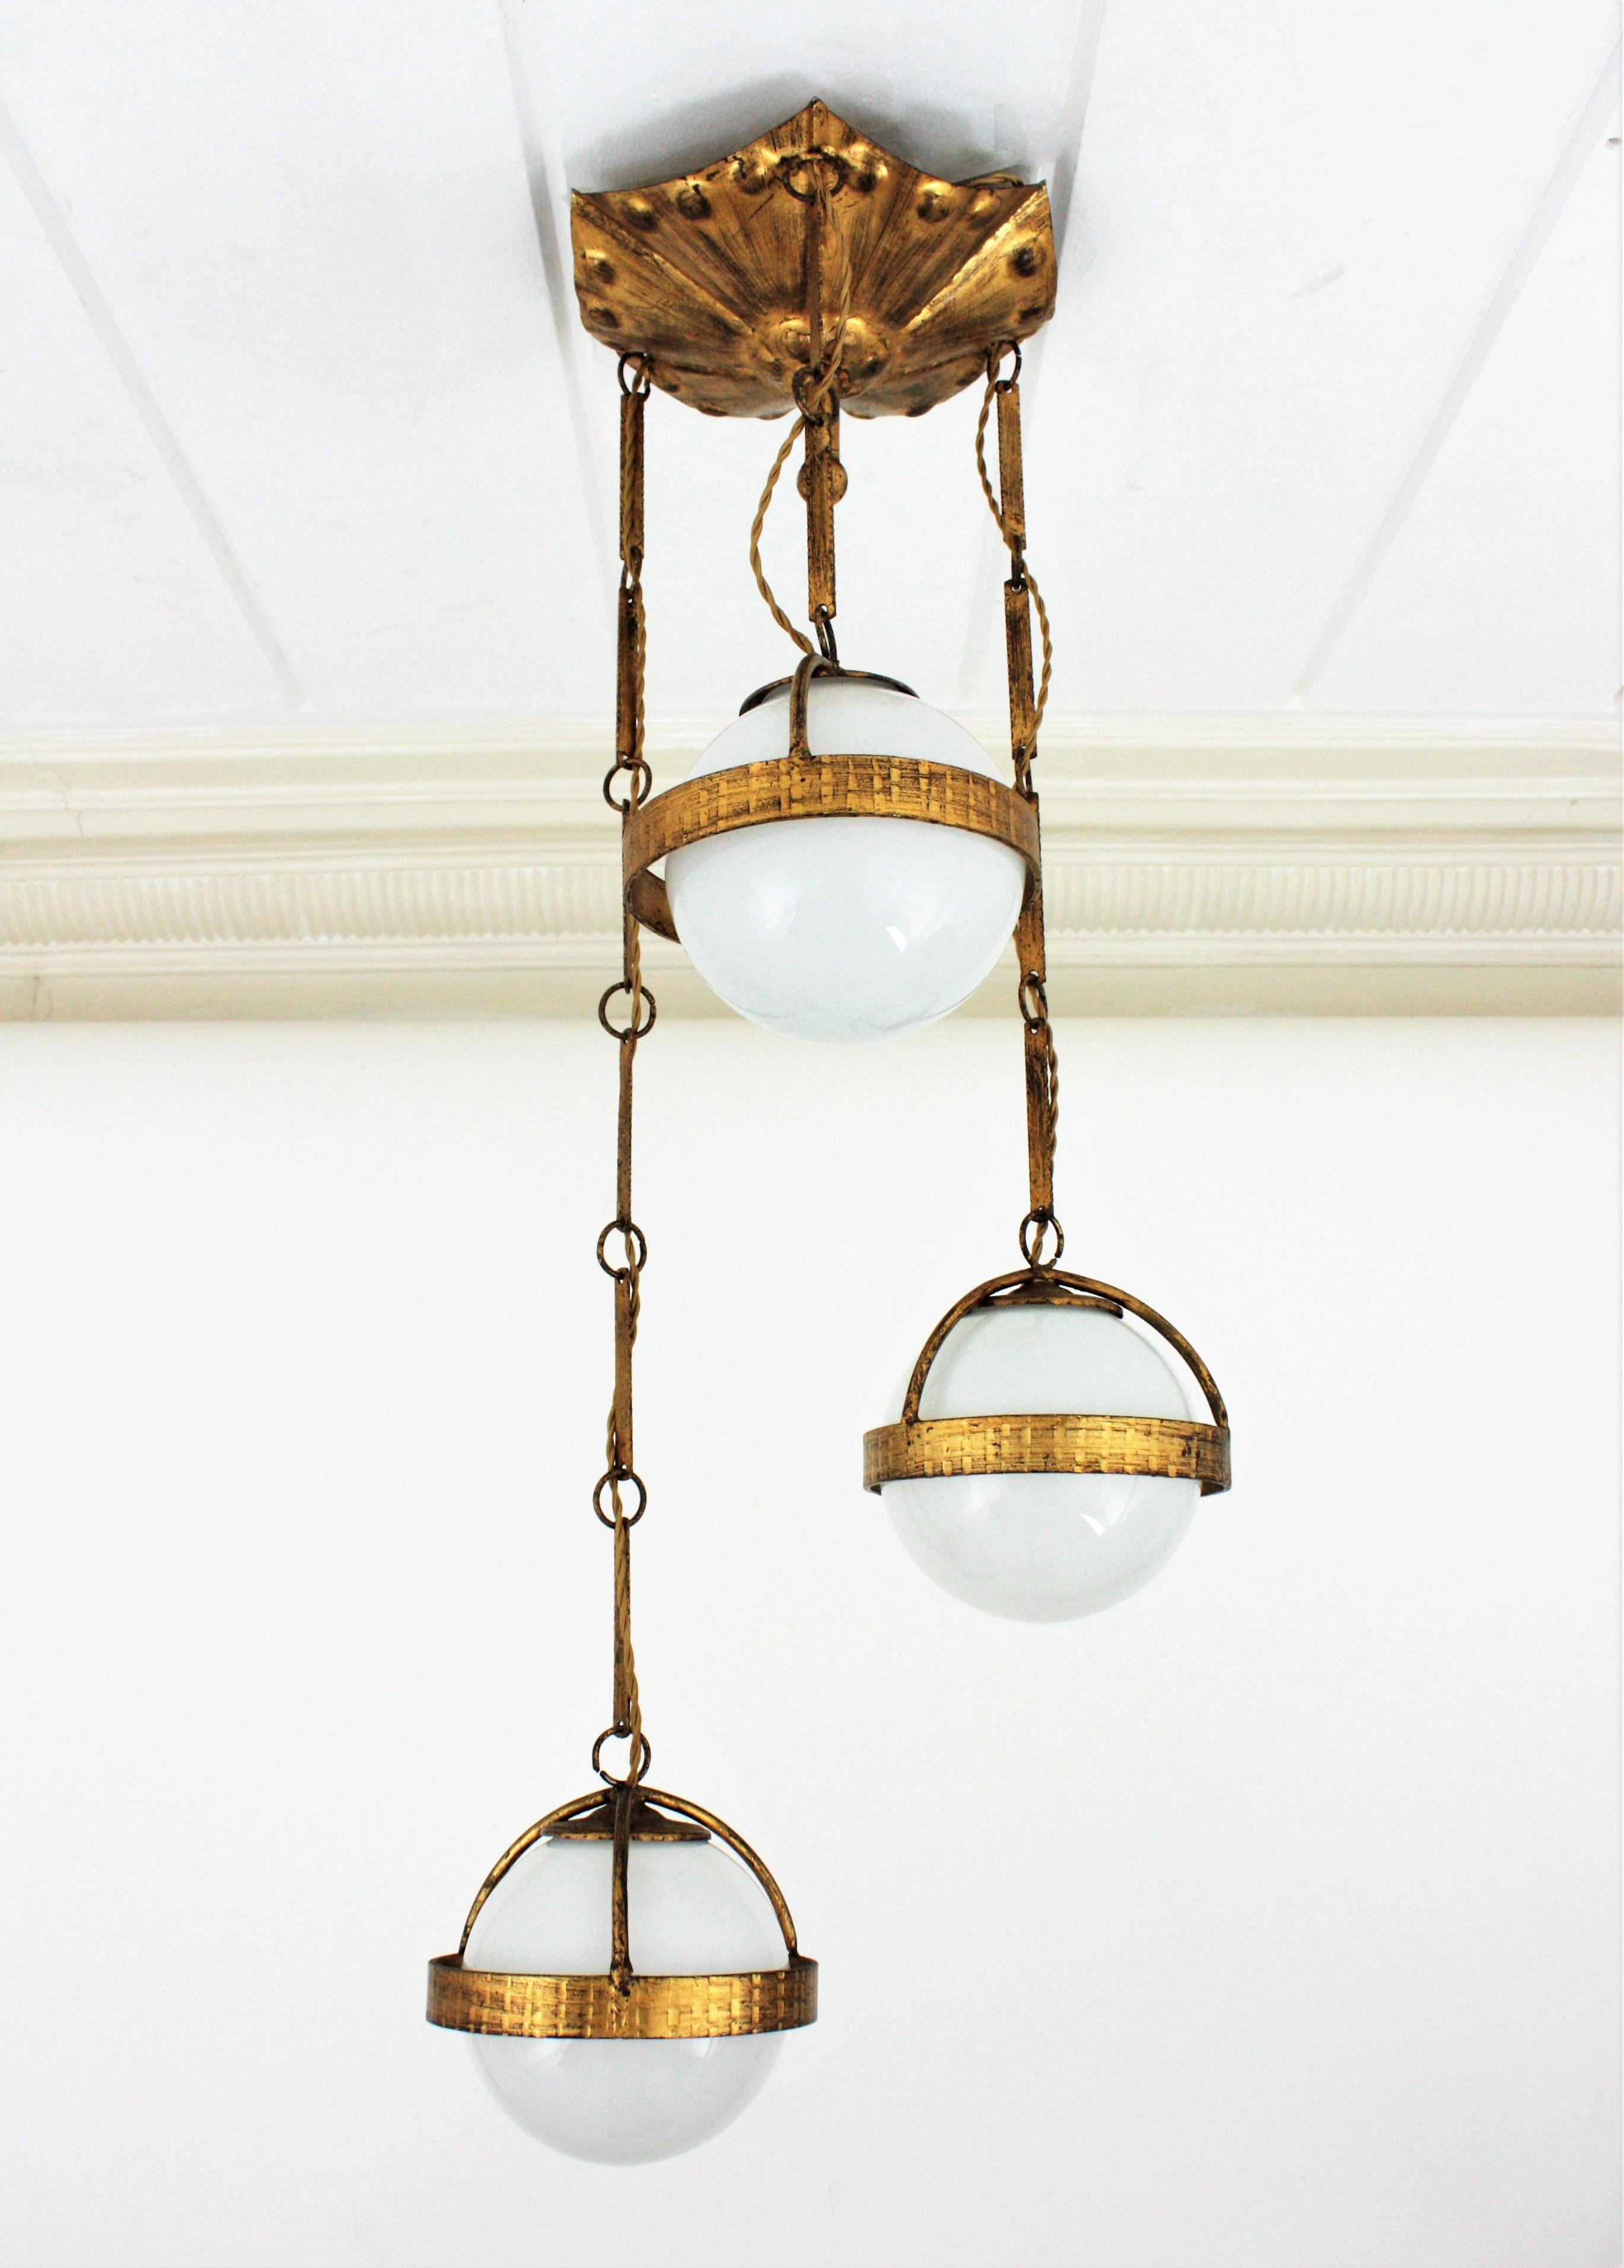 Amazing hand forged gilt iron cascading pendant with three opaline glass globes, Spain, 1940s.
This eye-catching pendant features a massive gilt iron canopy holding three glass globe shades surrounded by a ring structure hanging from chains